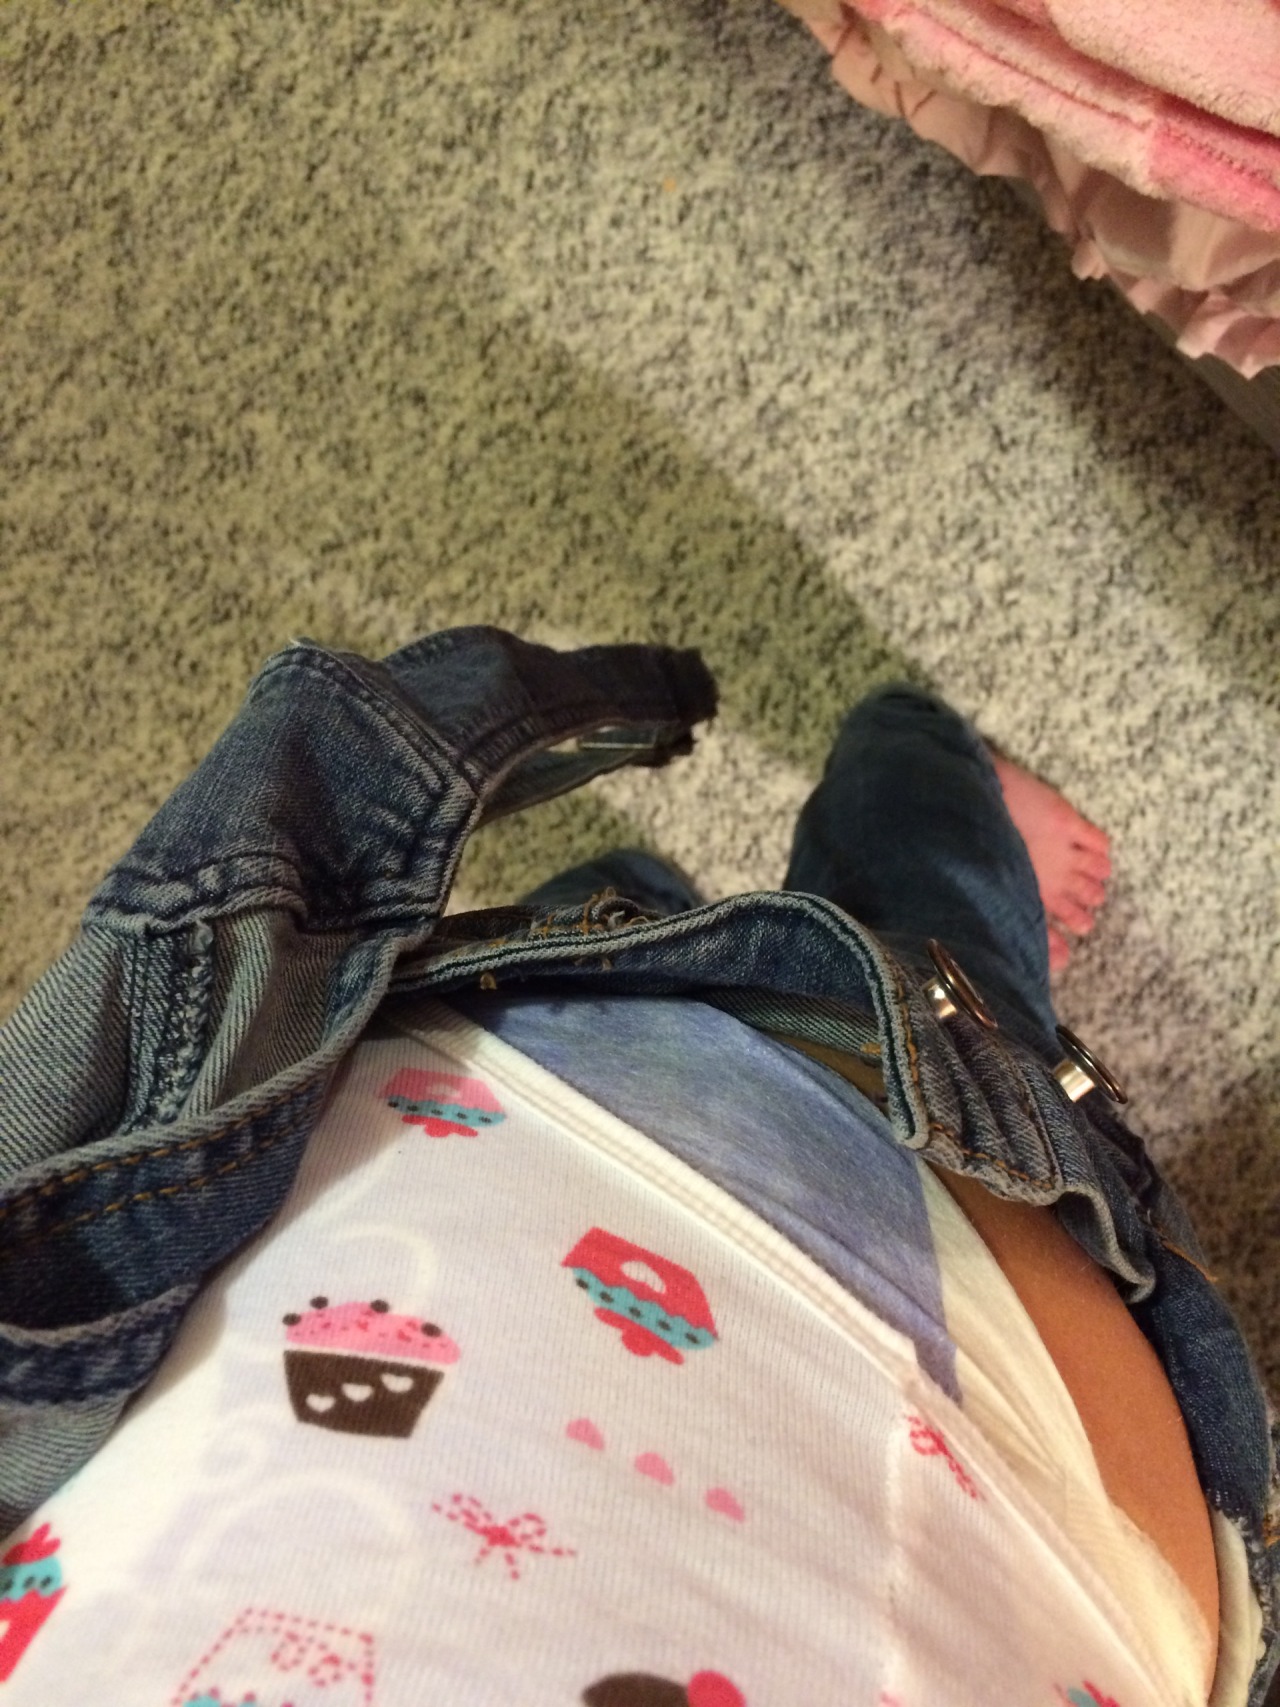 daddyslittledear:  daddydoc:  Think anyone will know I’m wearing a dip and onesie